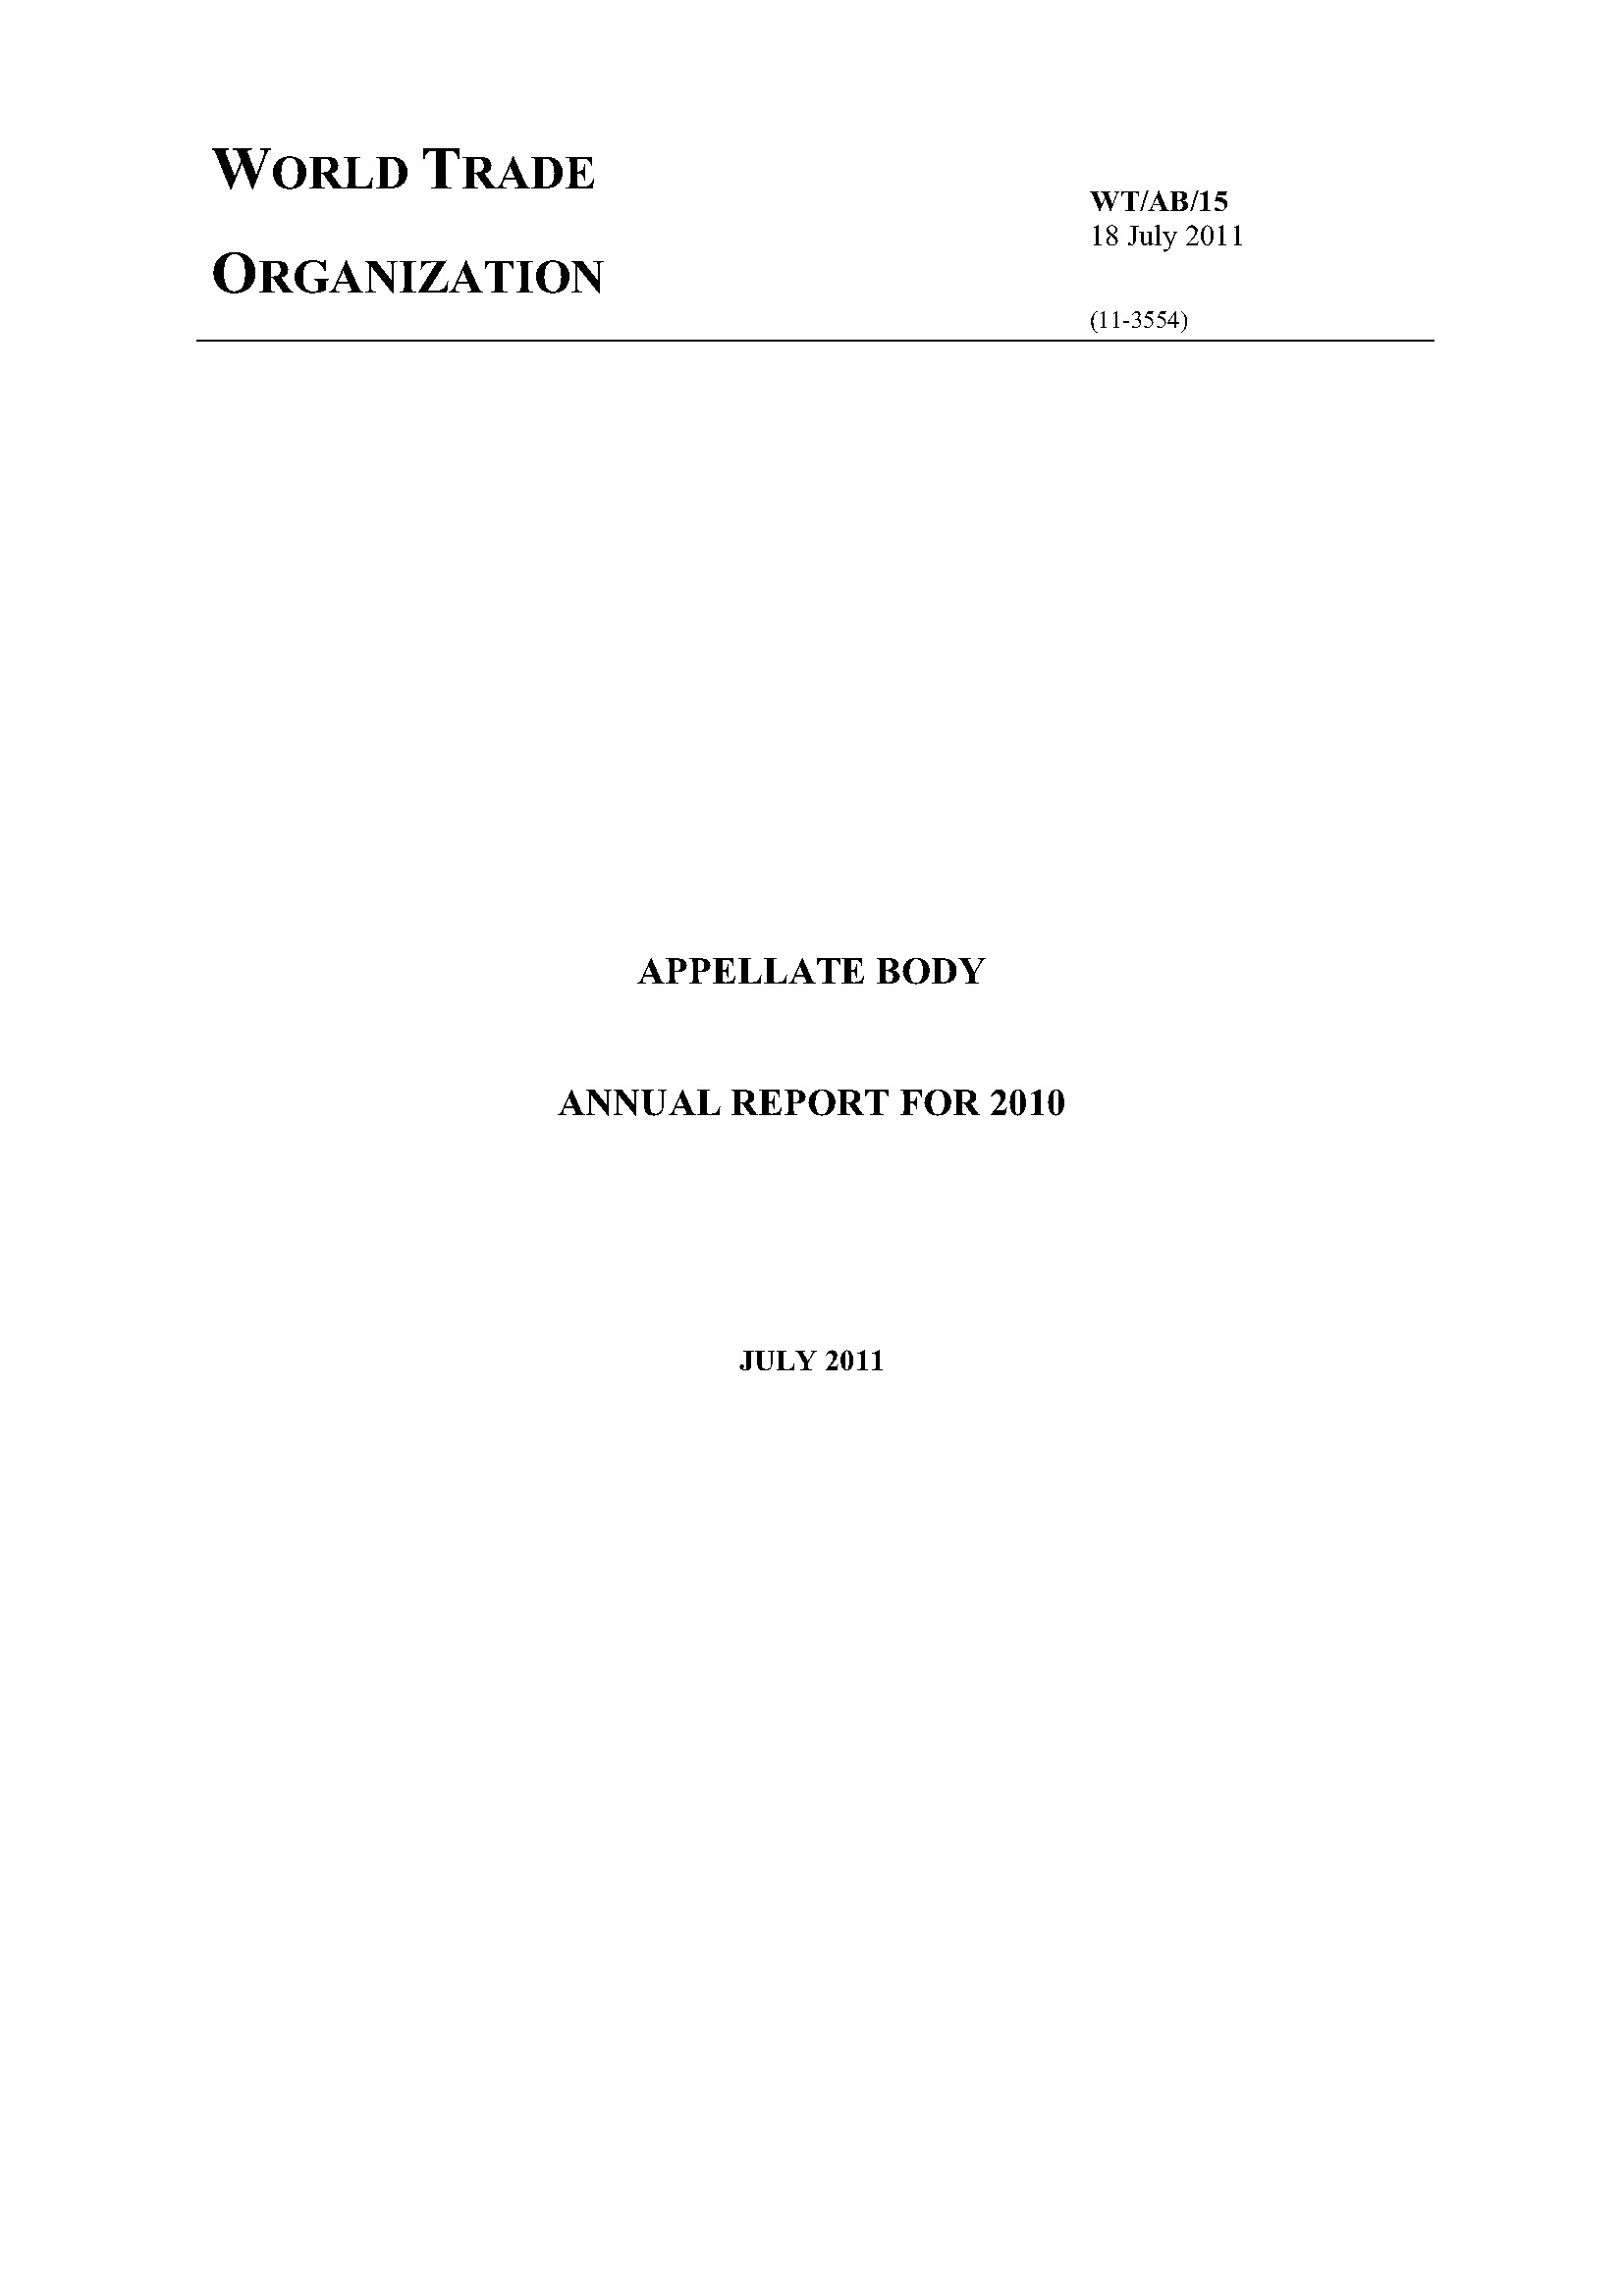 image of Appellate Body annual report for 2010